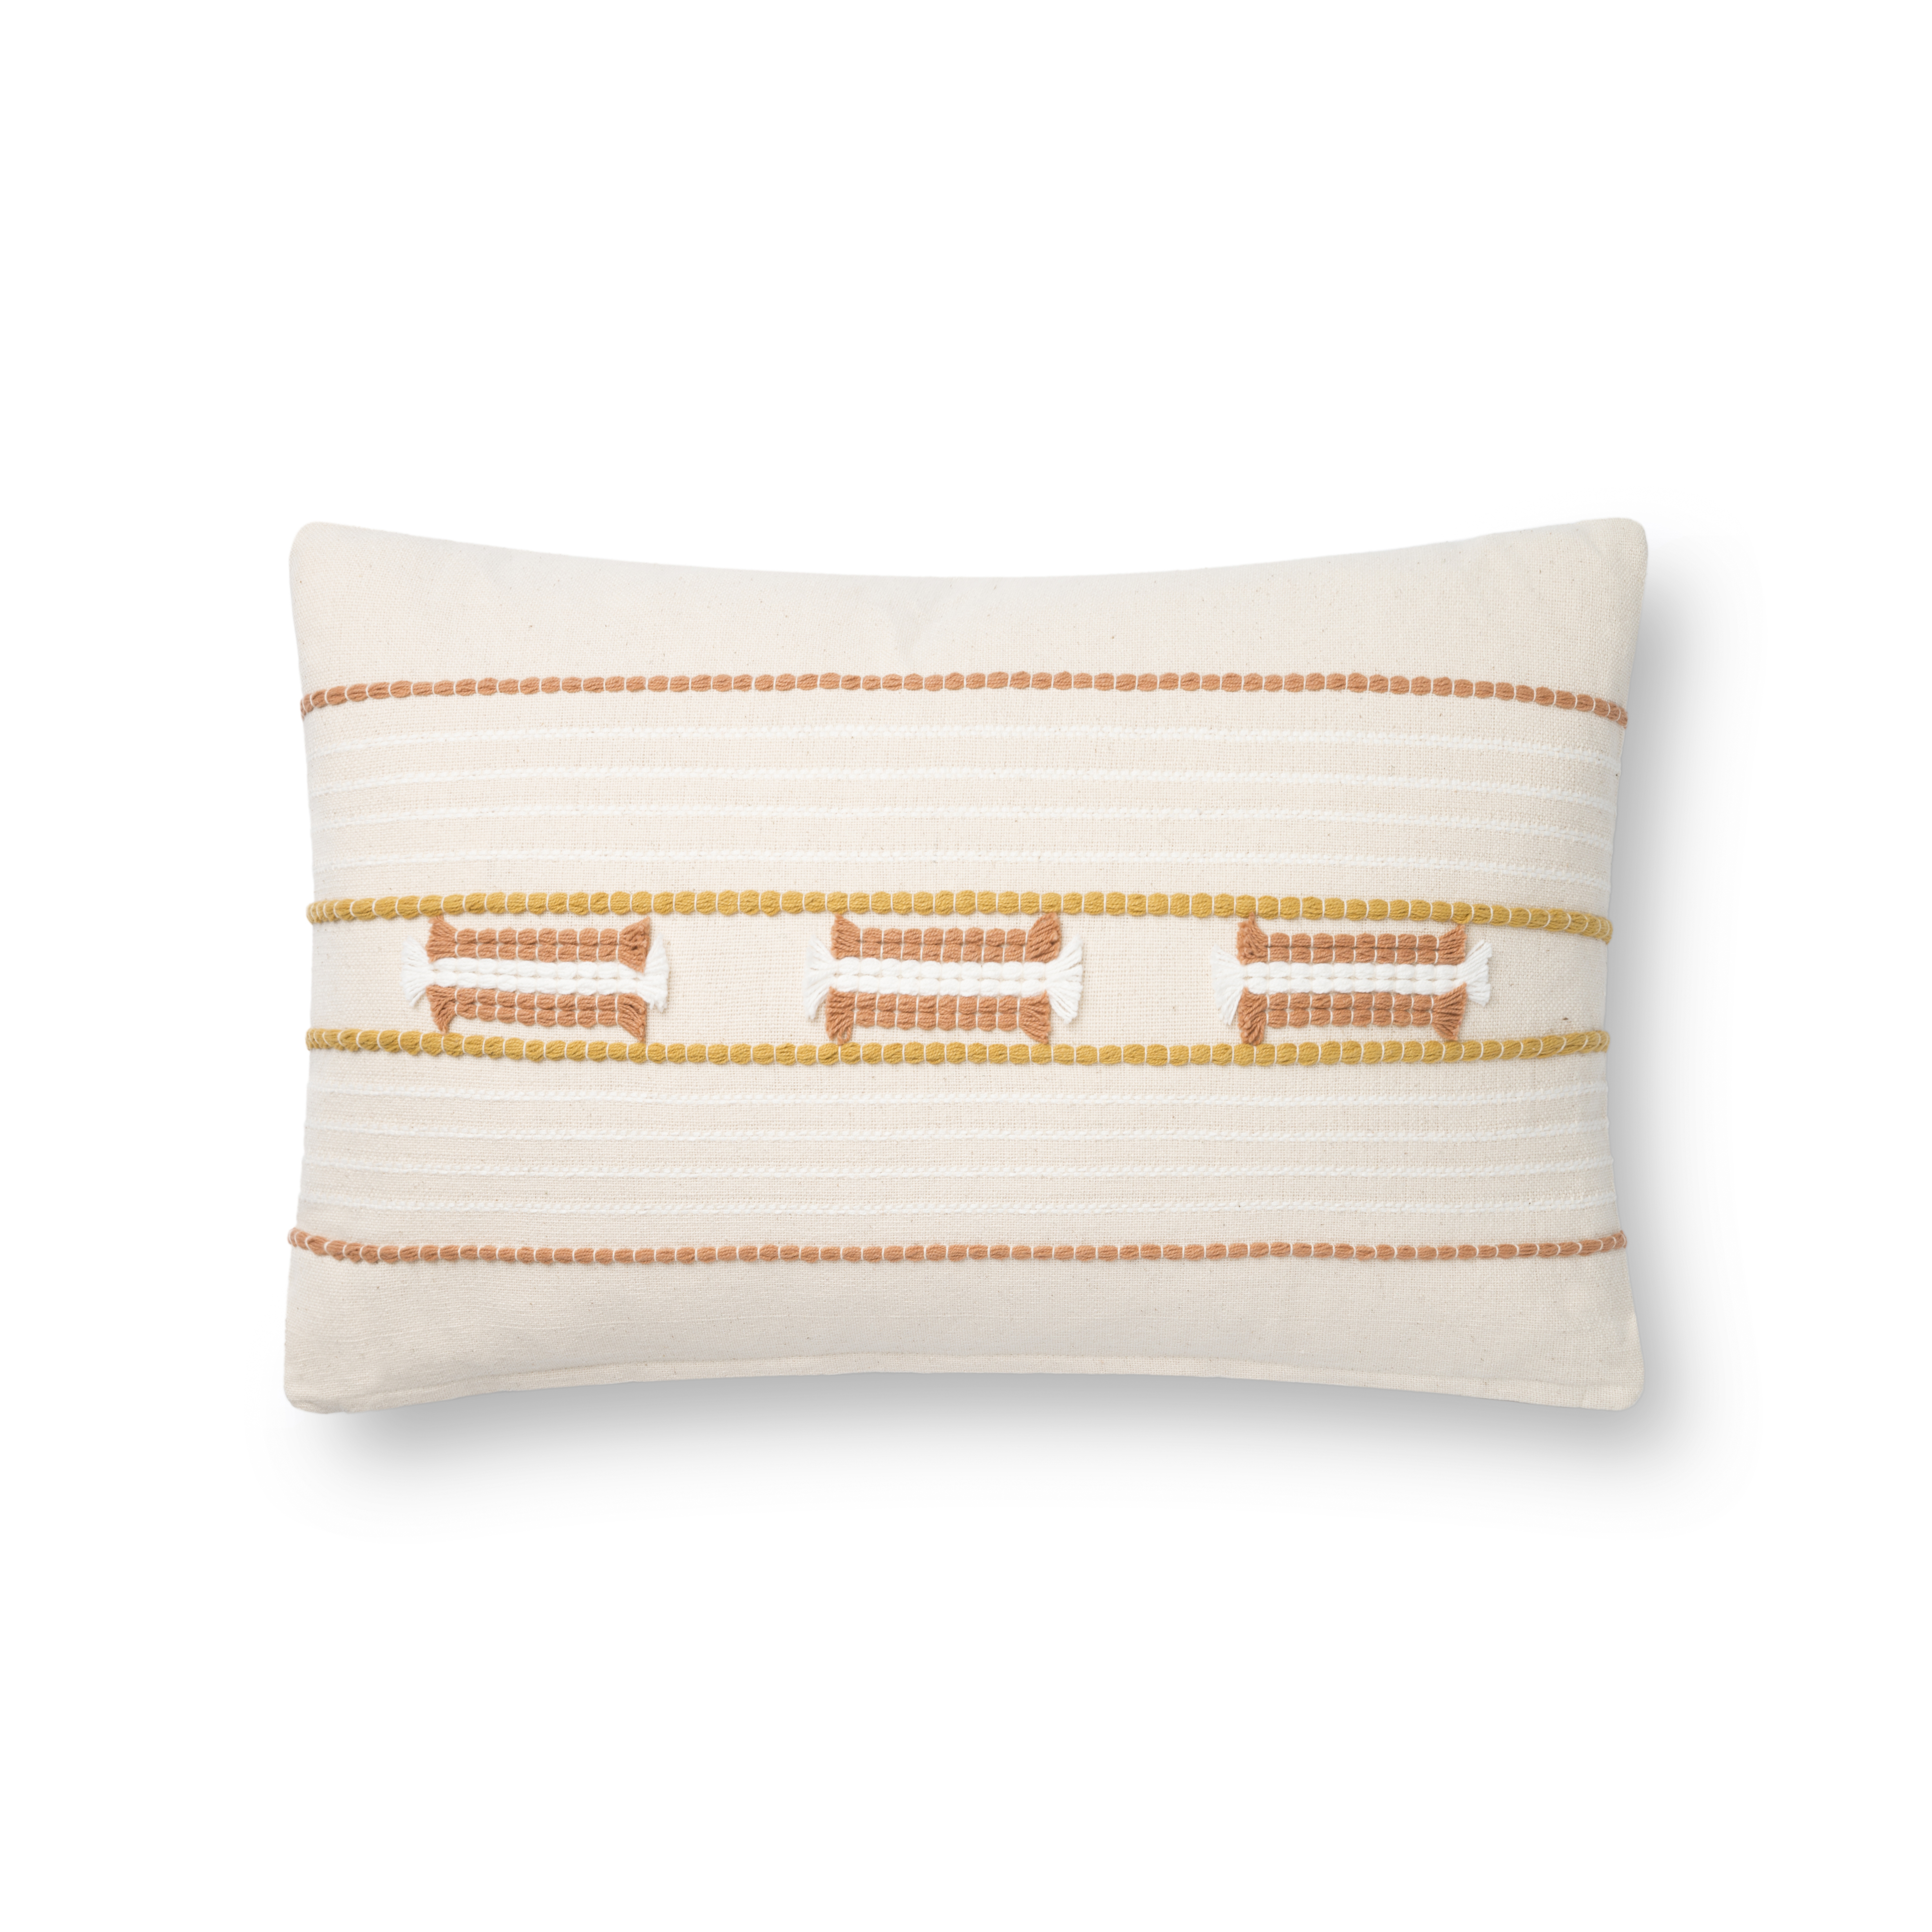 Magnolia Home by Joanna Gaines PILLOWS P1141 NATURAL / BLUSH 13" x 21" Cover Only - Magnolia Home by Joana Gaines Crafted by Loloi Rugs